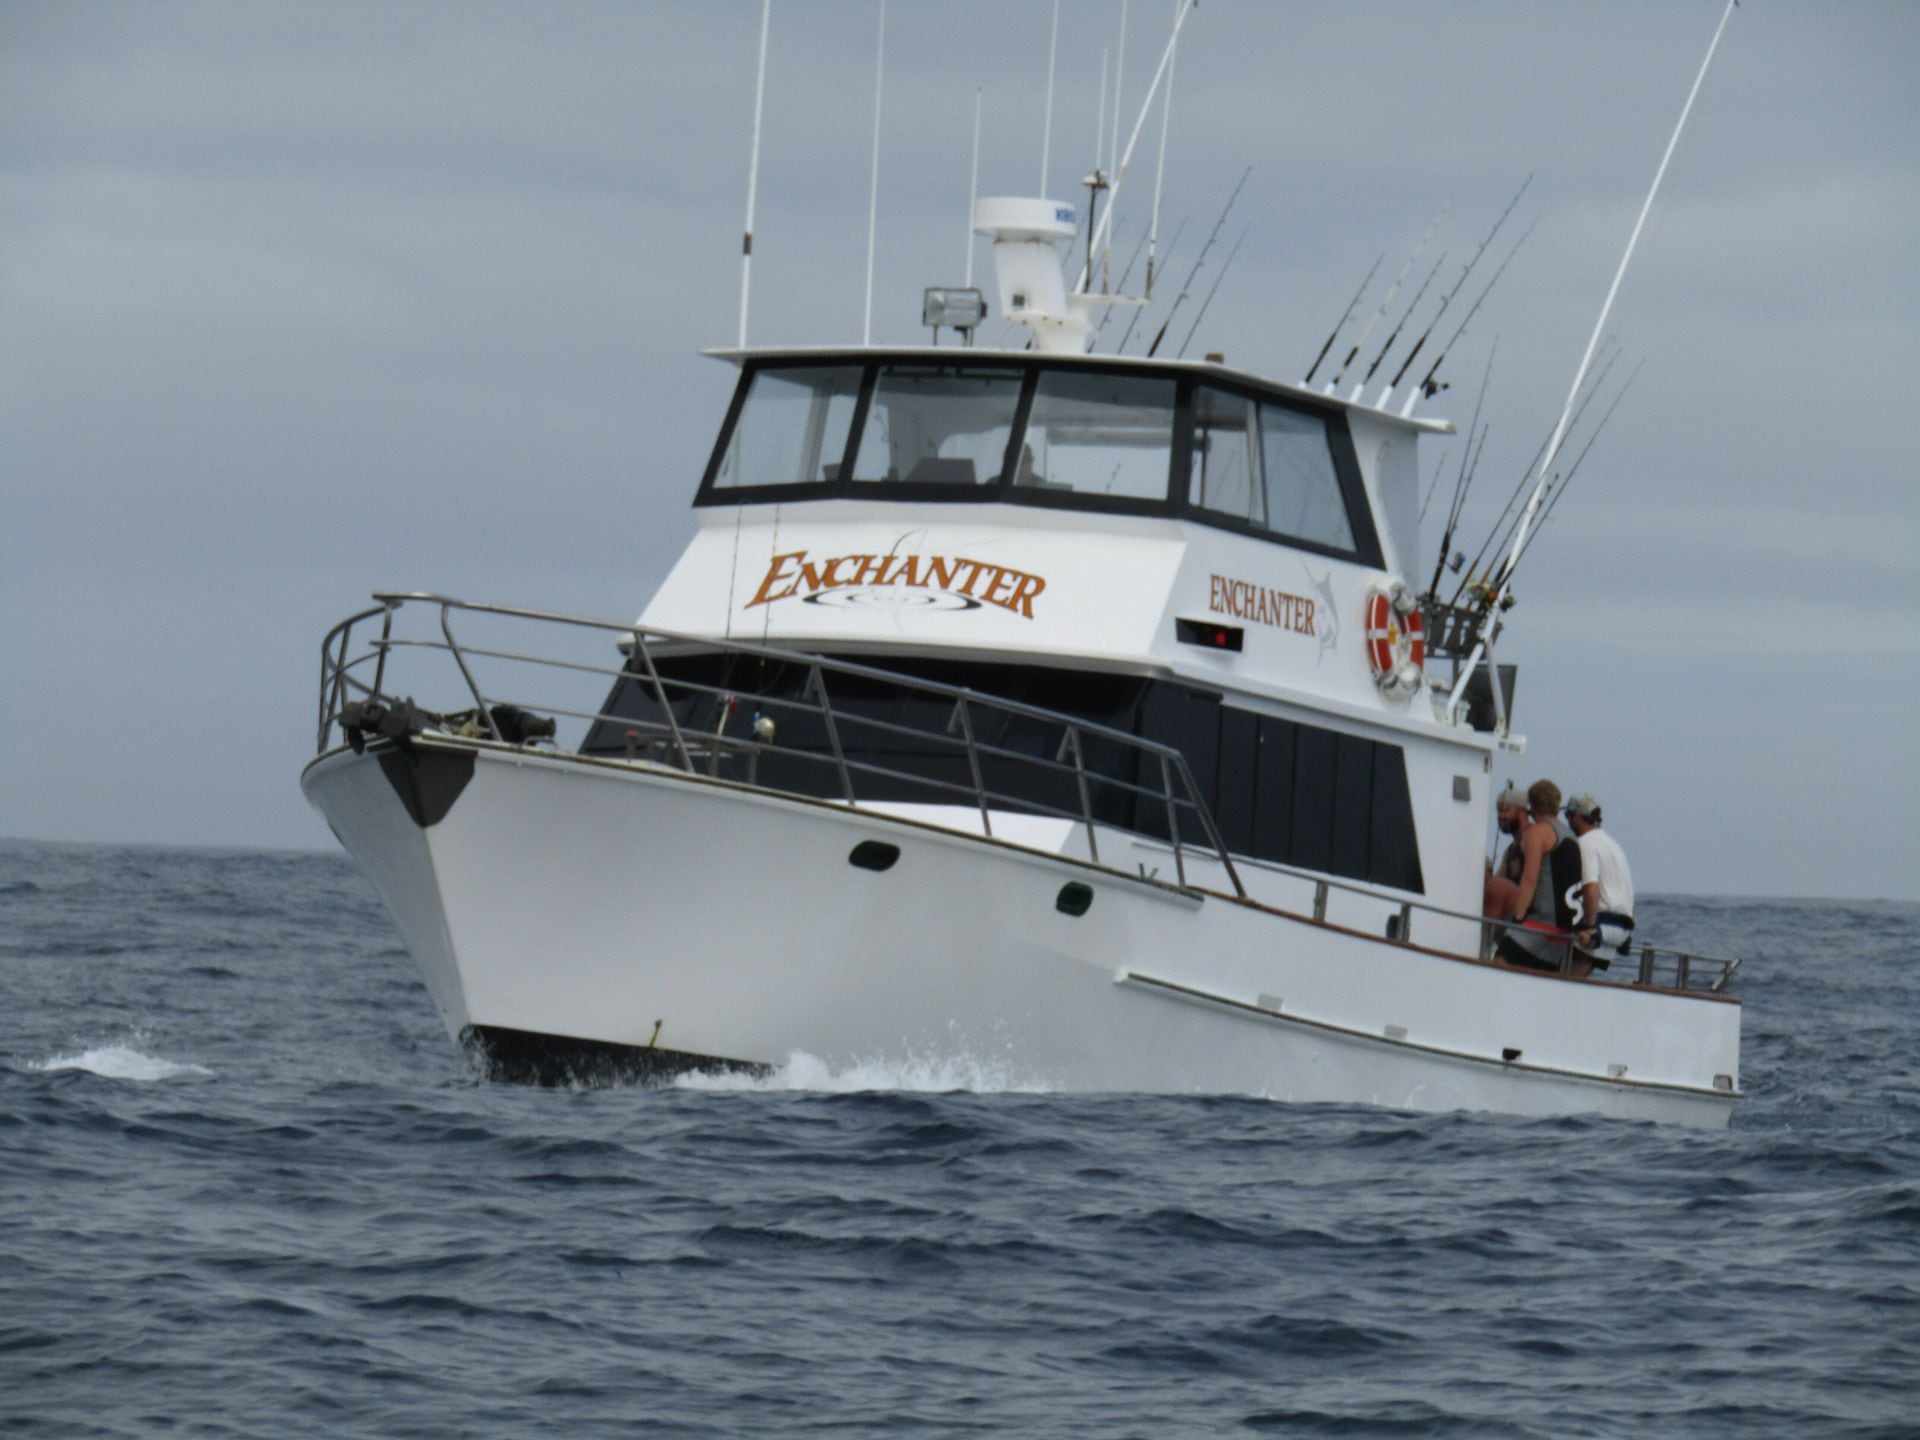 Enchanter tragedy: Inside the 'fishing trip of a lifetime' that